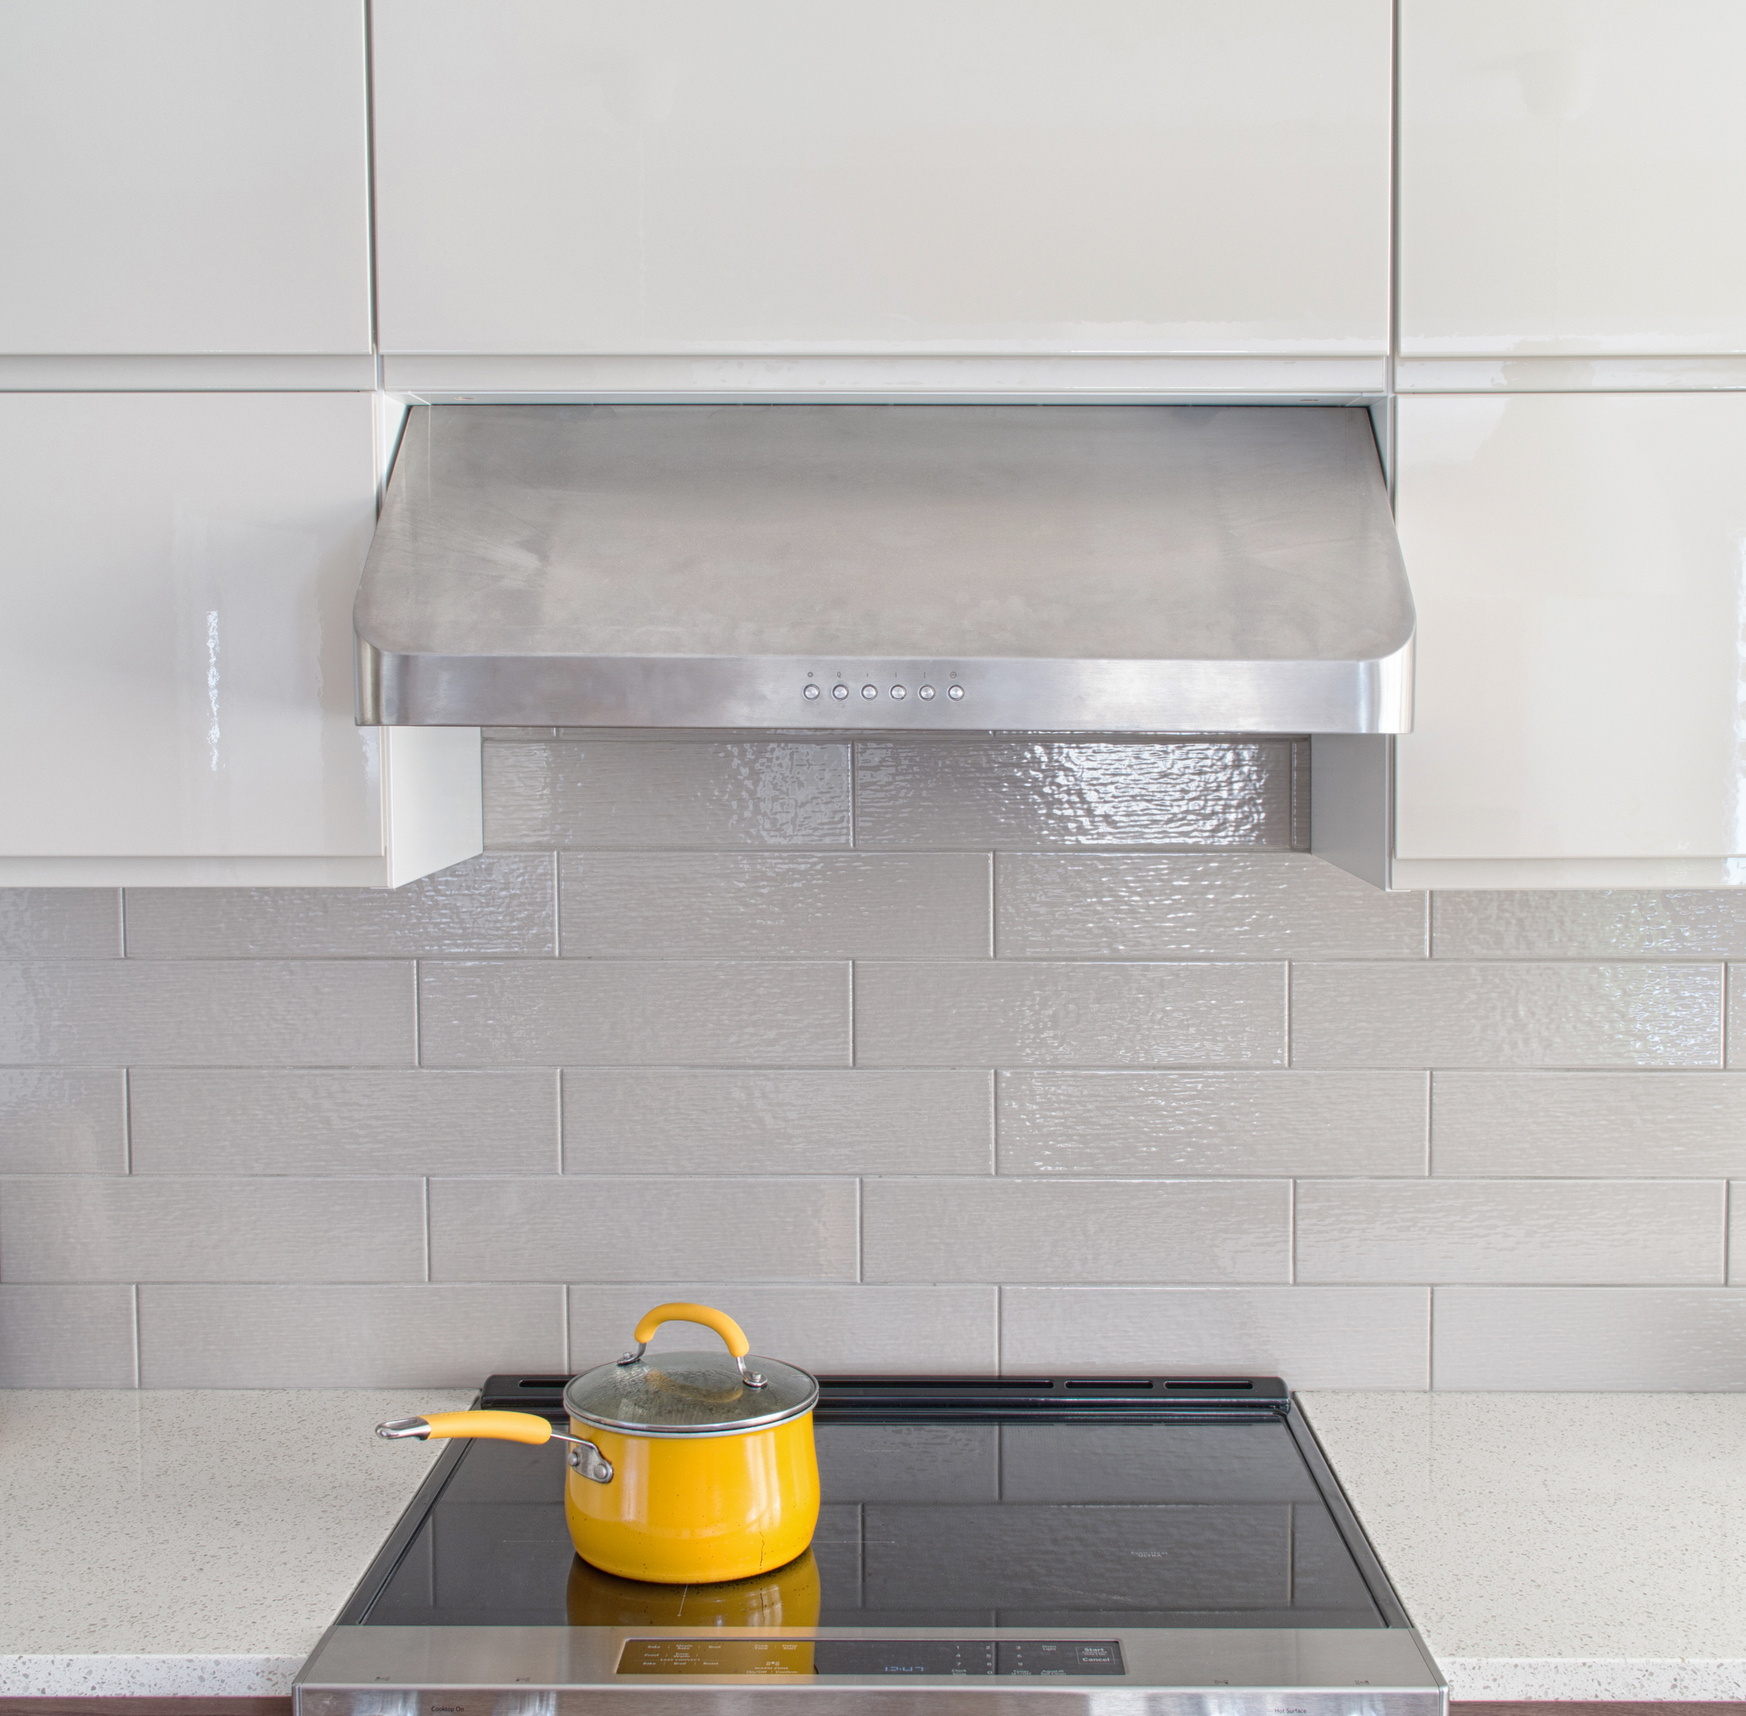 IStock Image   Above The Fold Image For Kitchen Ventilation Pillar Page March 2019 #keepProtocol